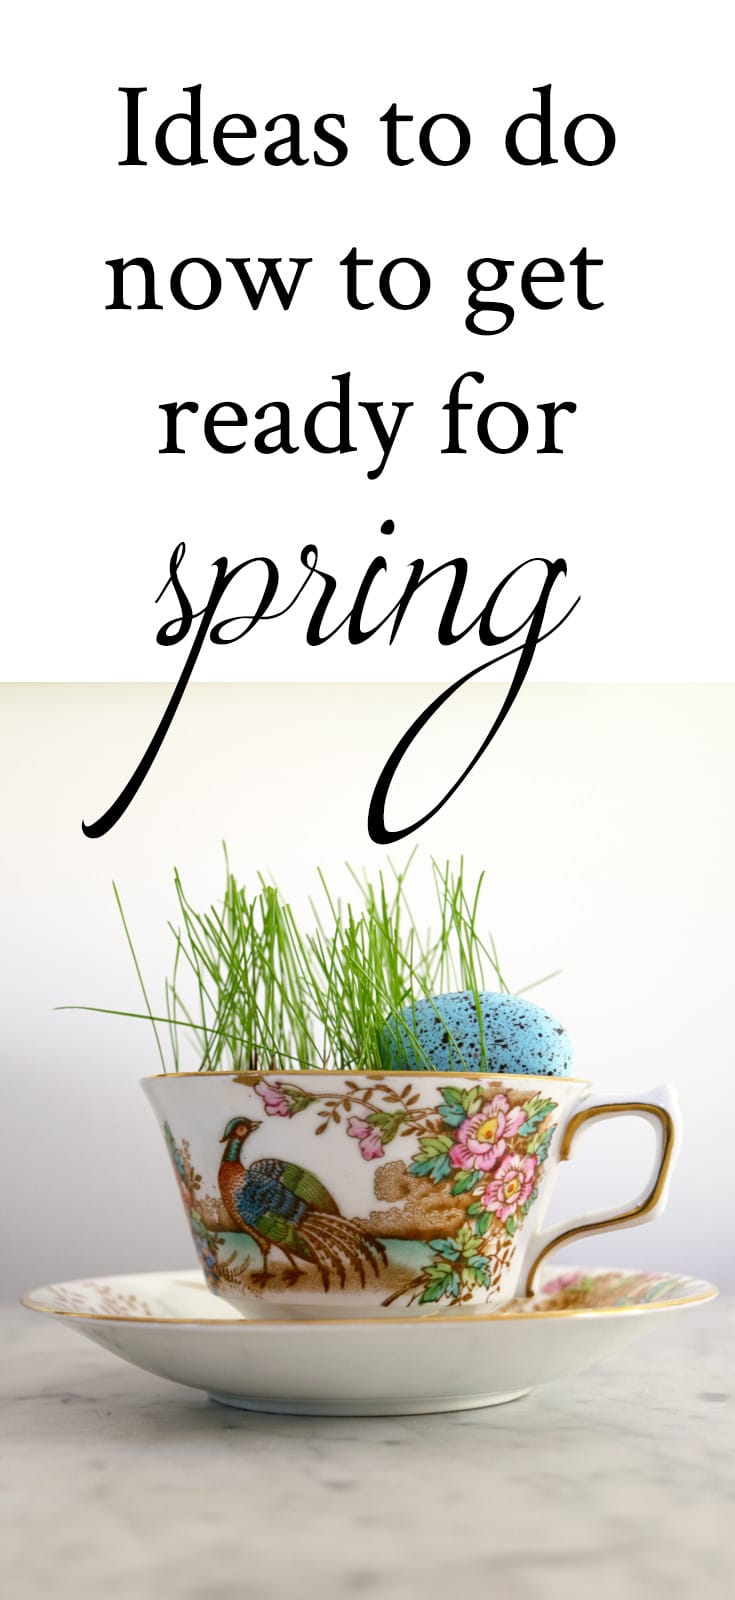 Spring Decor Ideas: Tea cup planter with grass and egg, ideas to do now to get ready for Spring